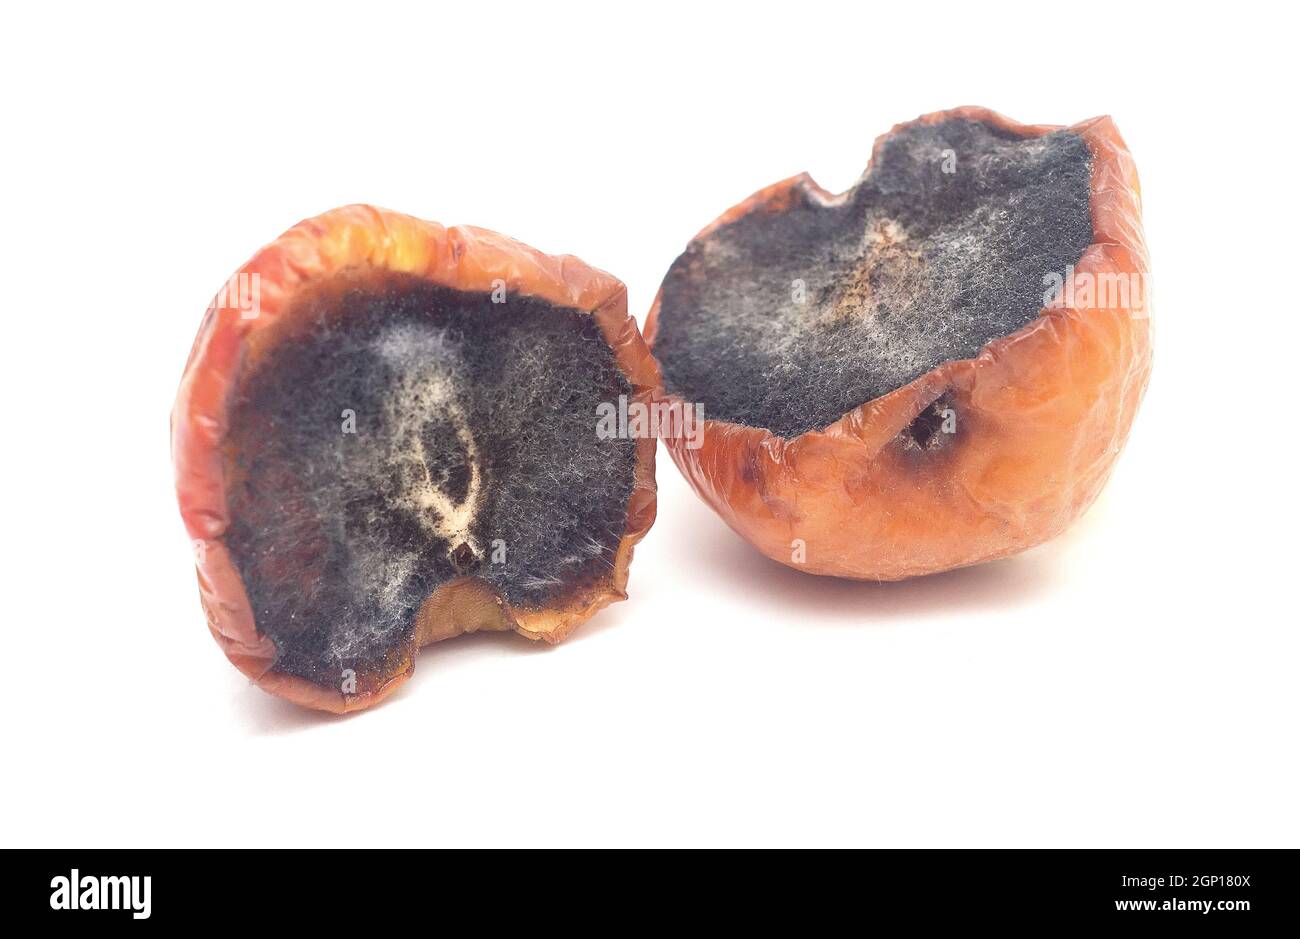 two large rotten blackened halves of an apple isolated on white background. Stock Photo